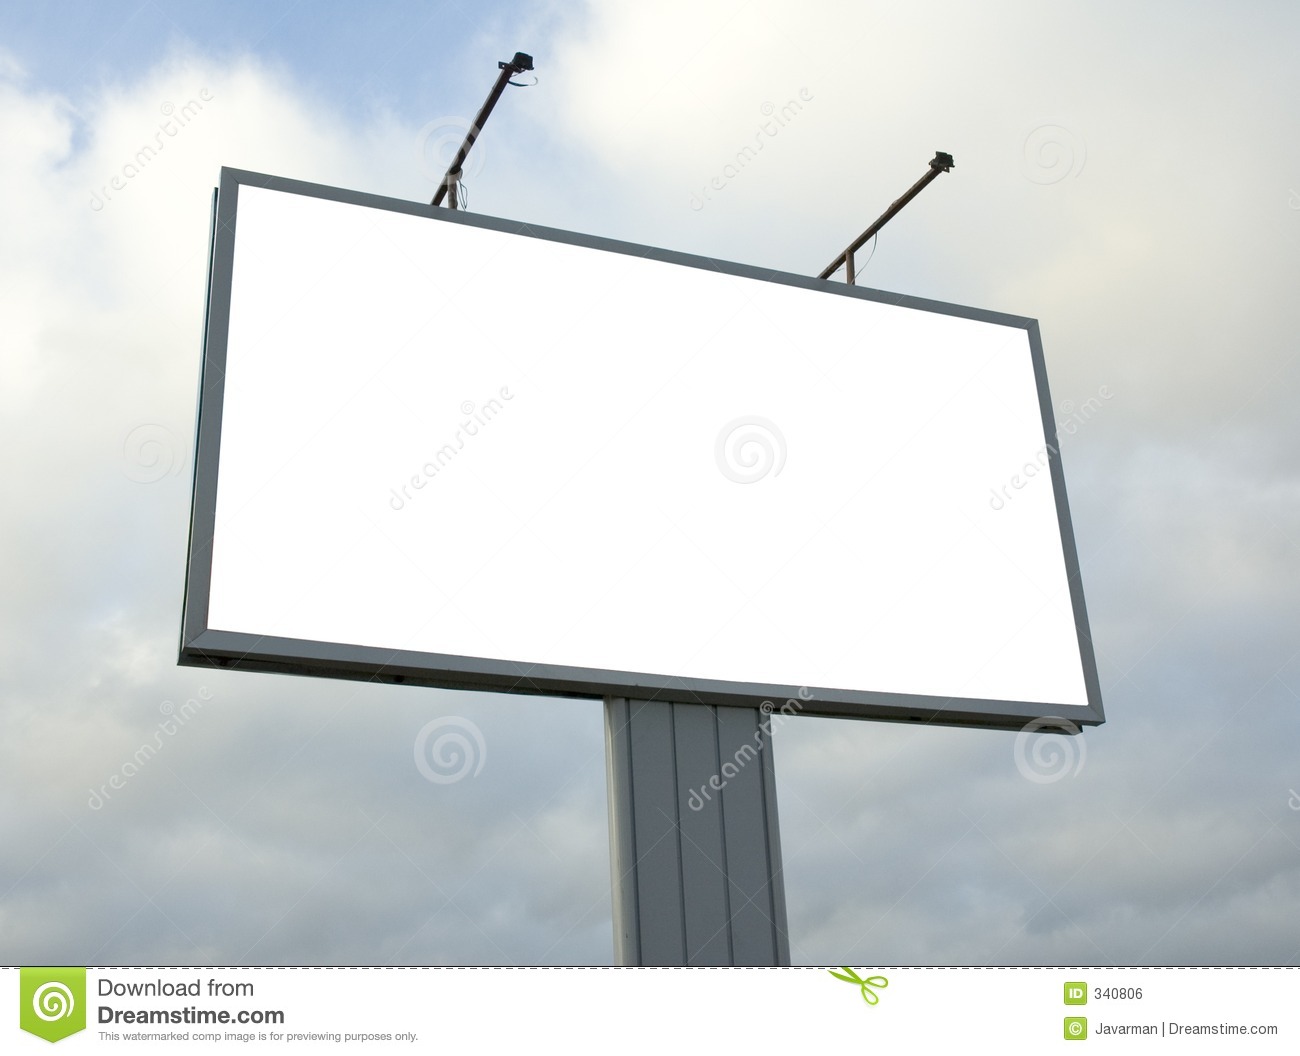 Blank billboard stock photo. Image of lamps, display, announcement.